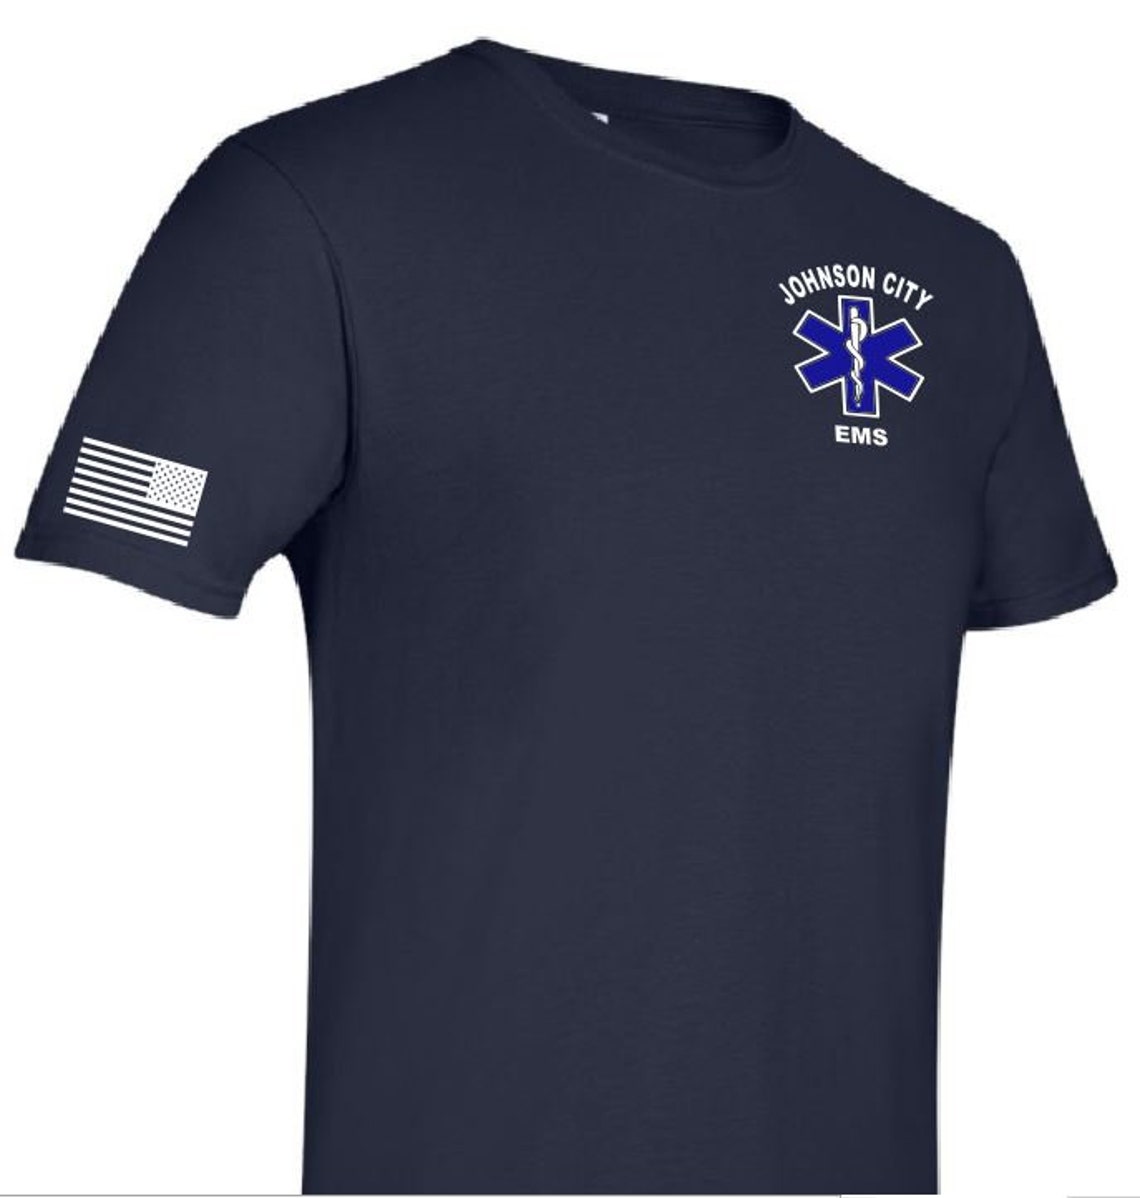 Personalized EMS EMT Paramedic T-shirt with 2 sleeve prints | Etsy